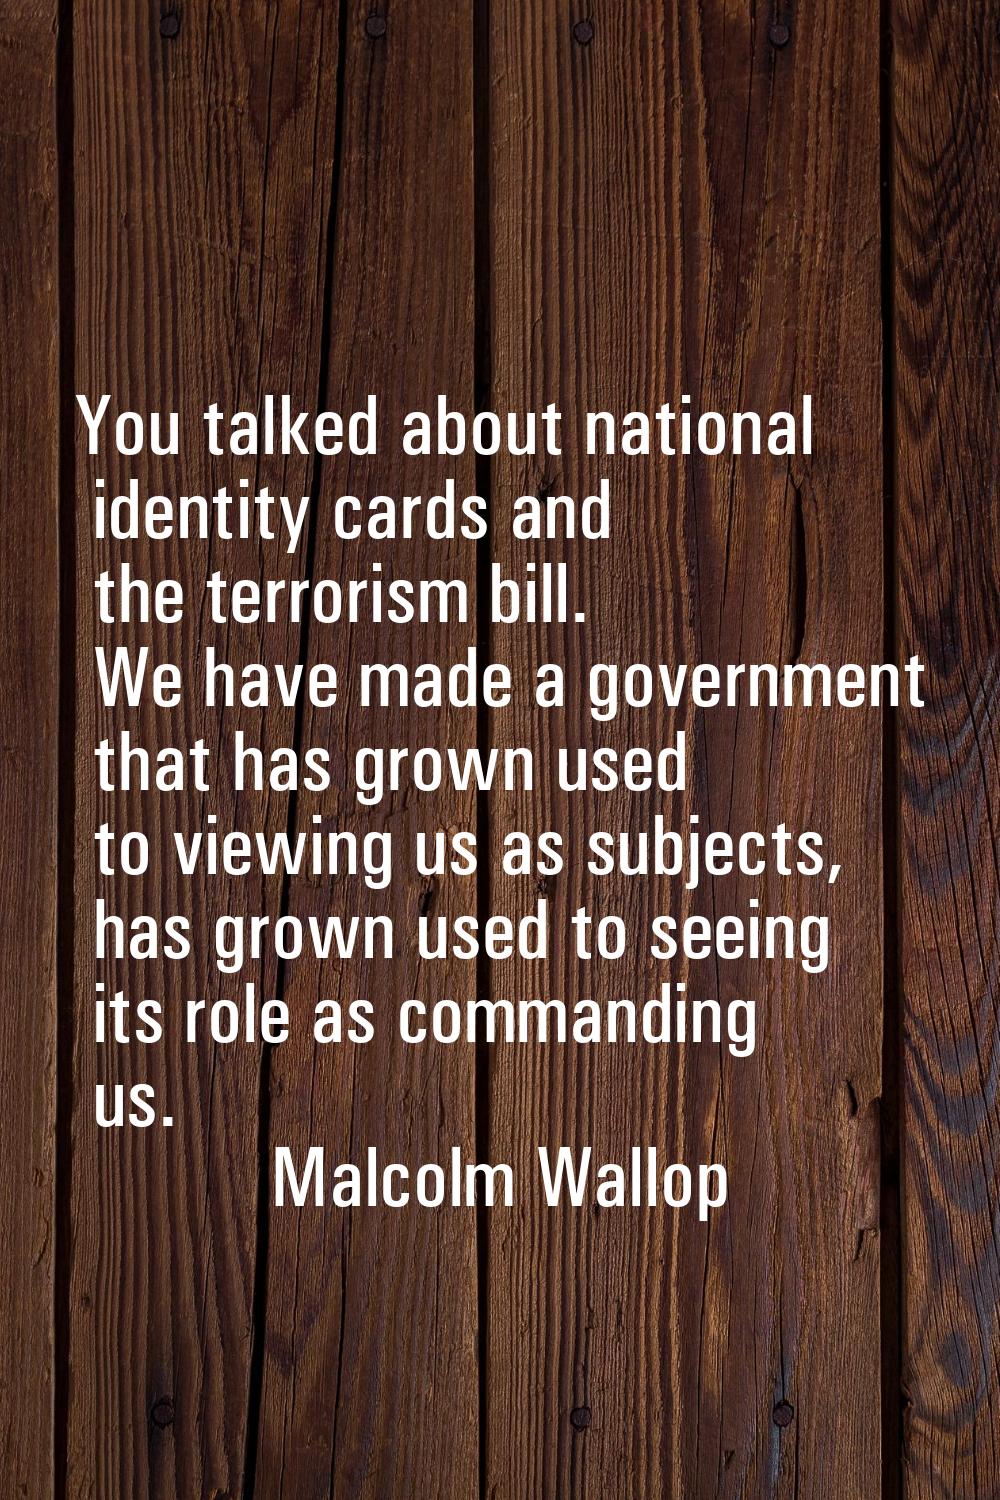 You talked about national identity cards and the terrorism bill. We have made a government that has